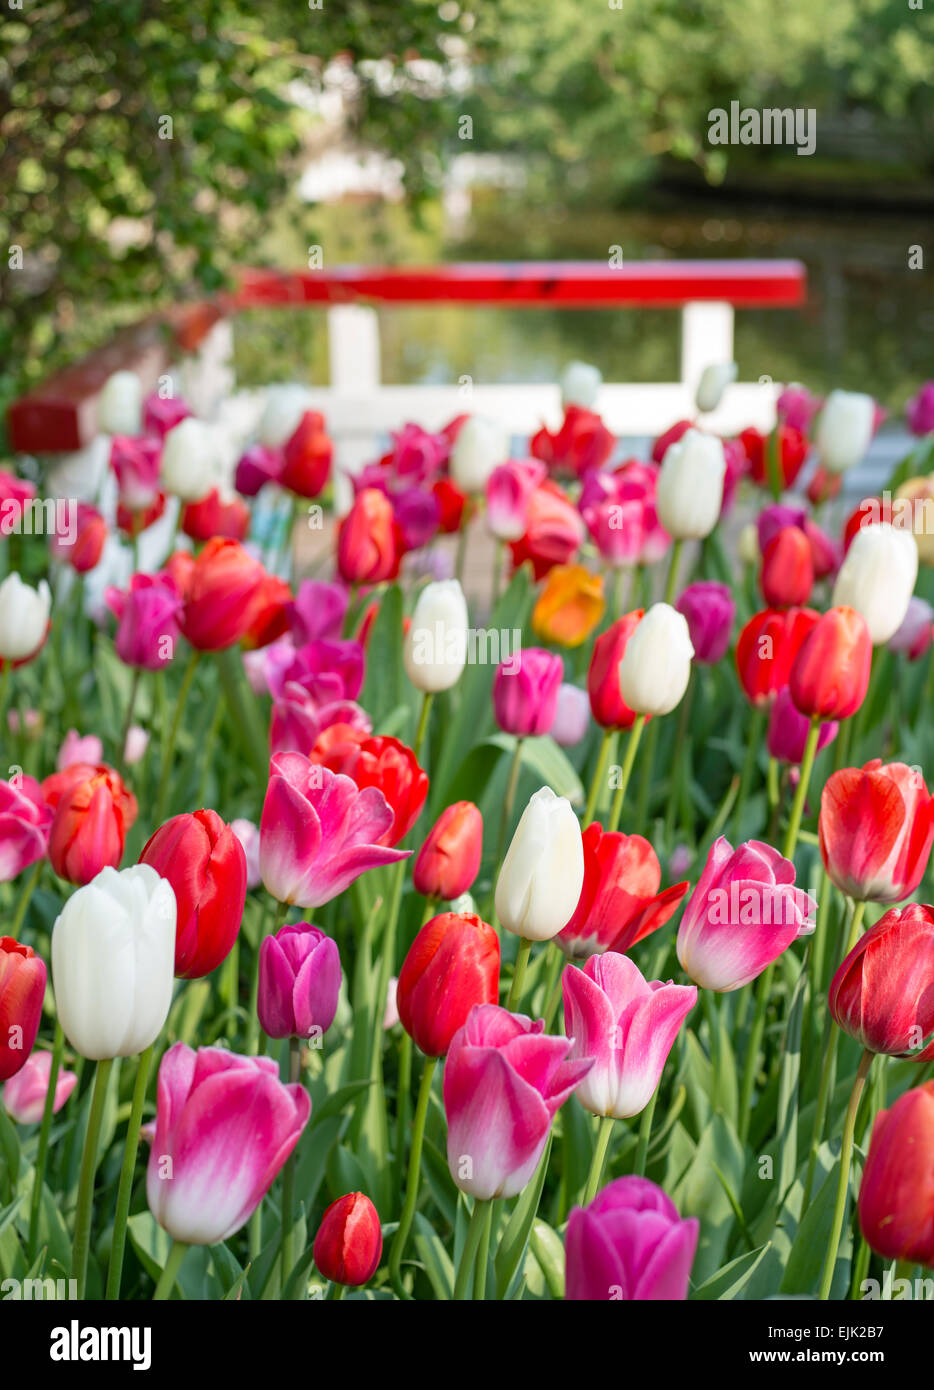 Spring flower bed with red, white and magenta tulips (Tulipa) in a park Stock Photo